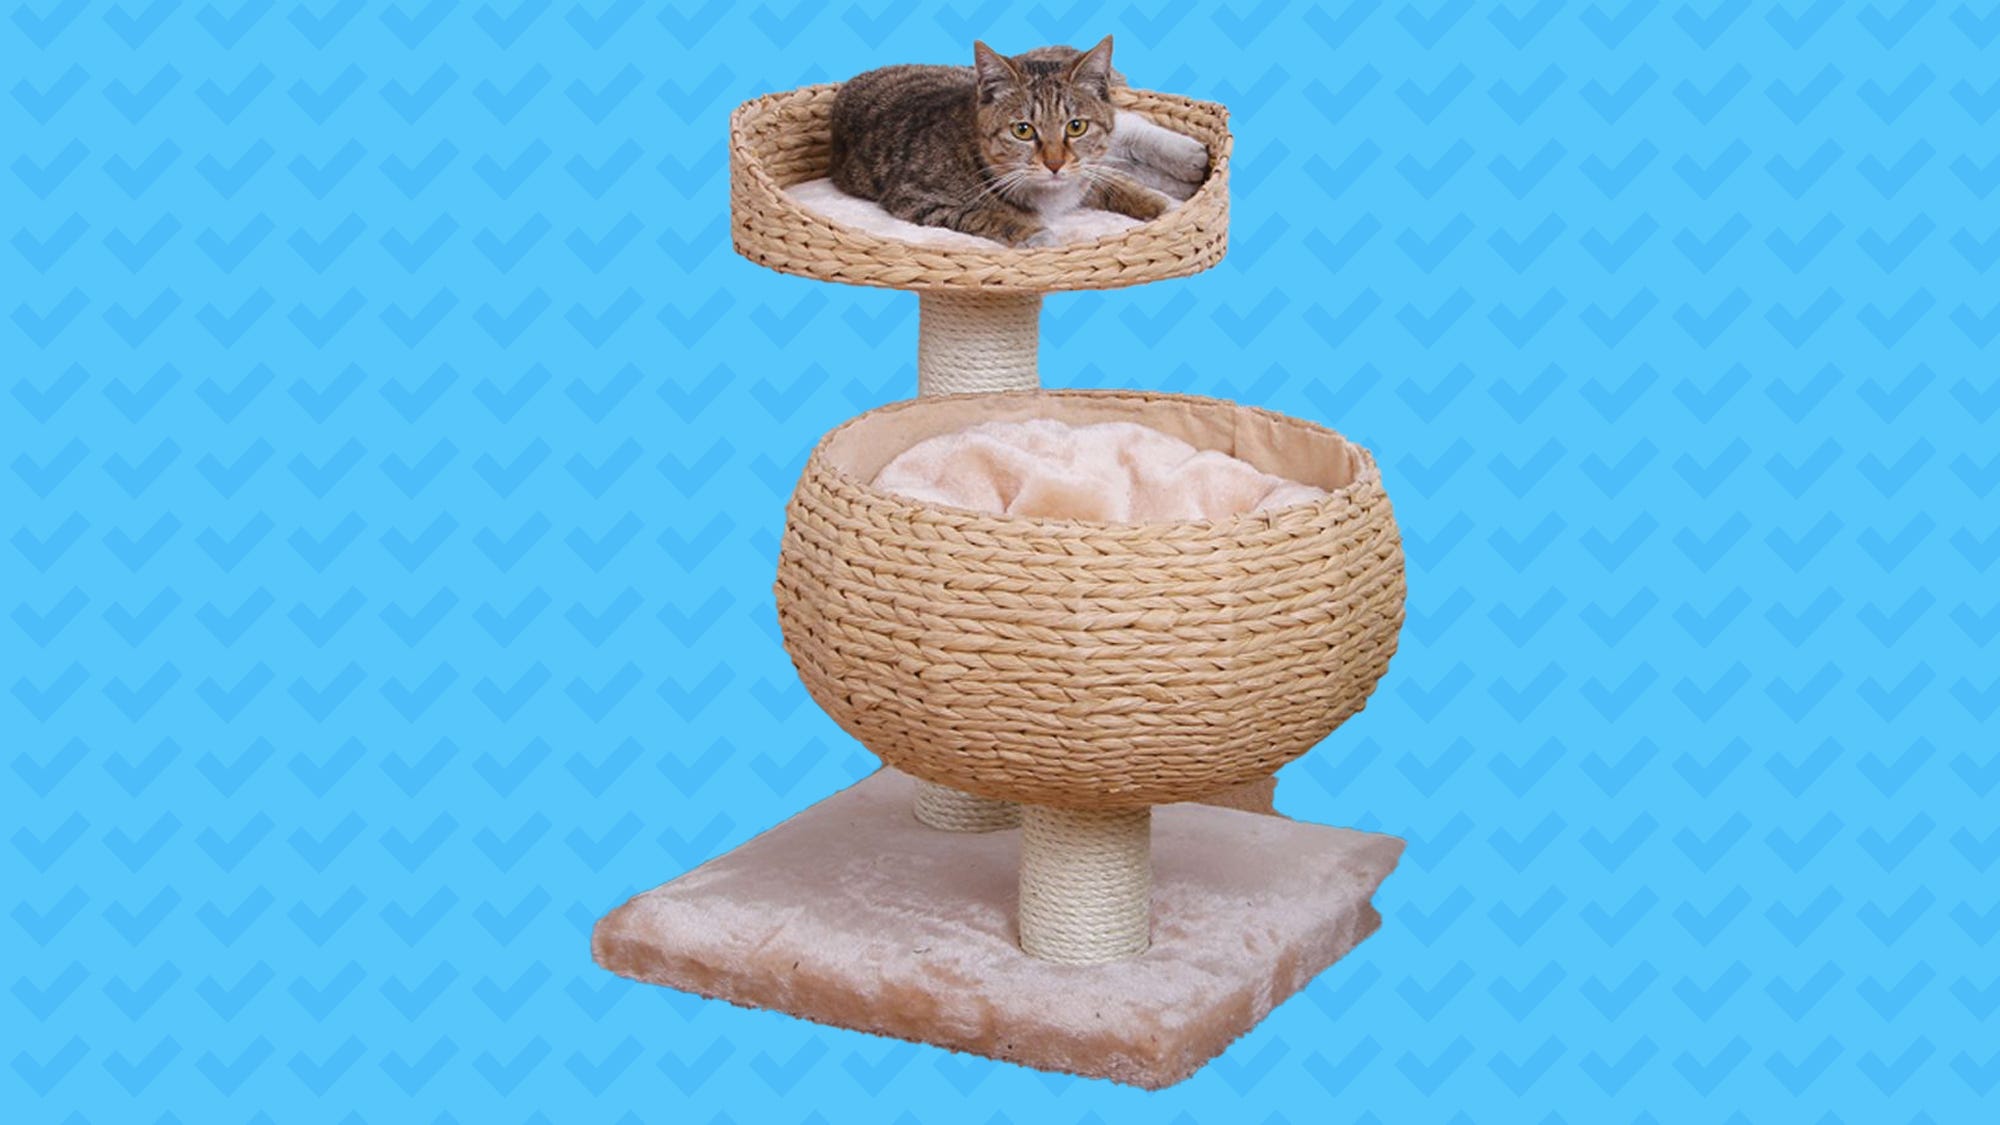 cat play towers for sale